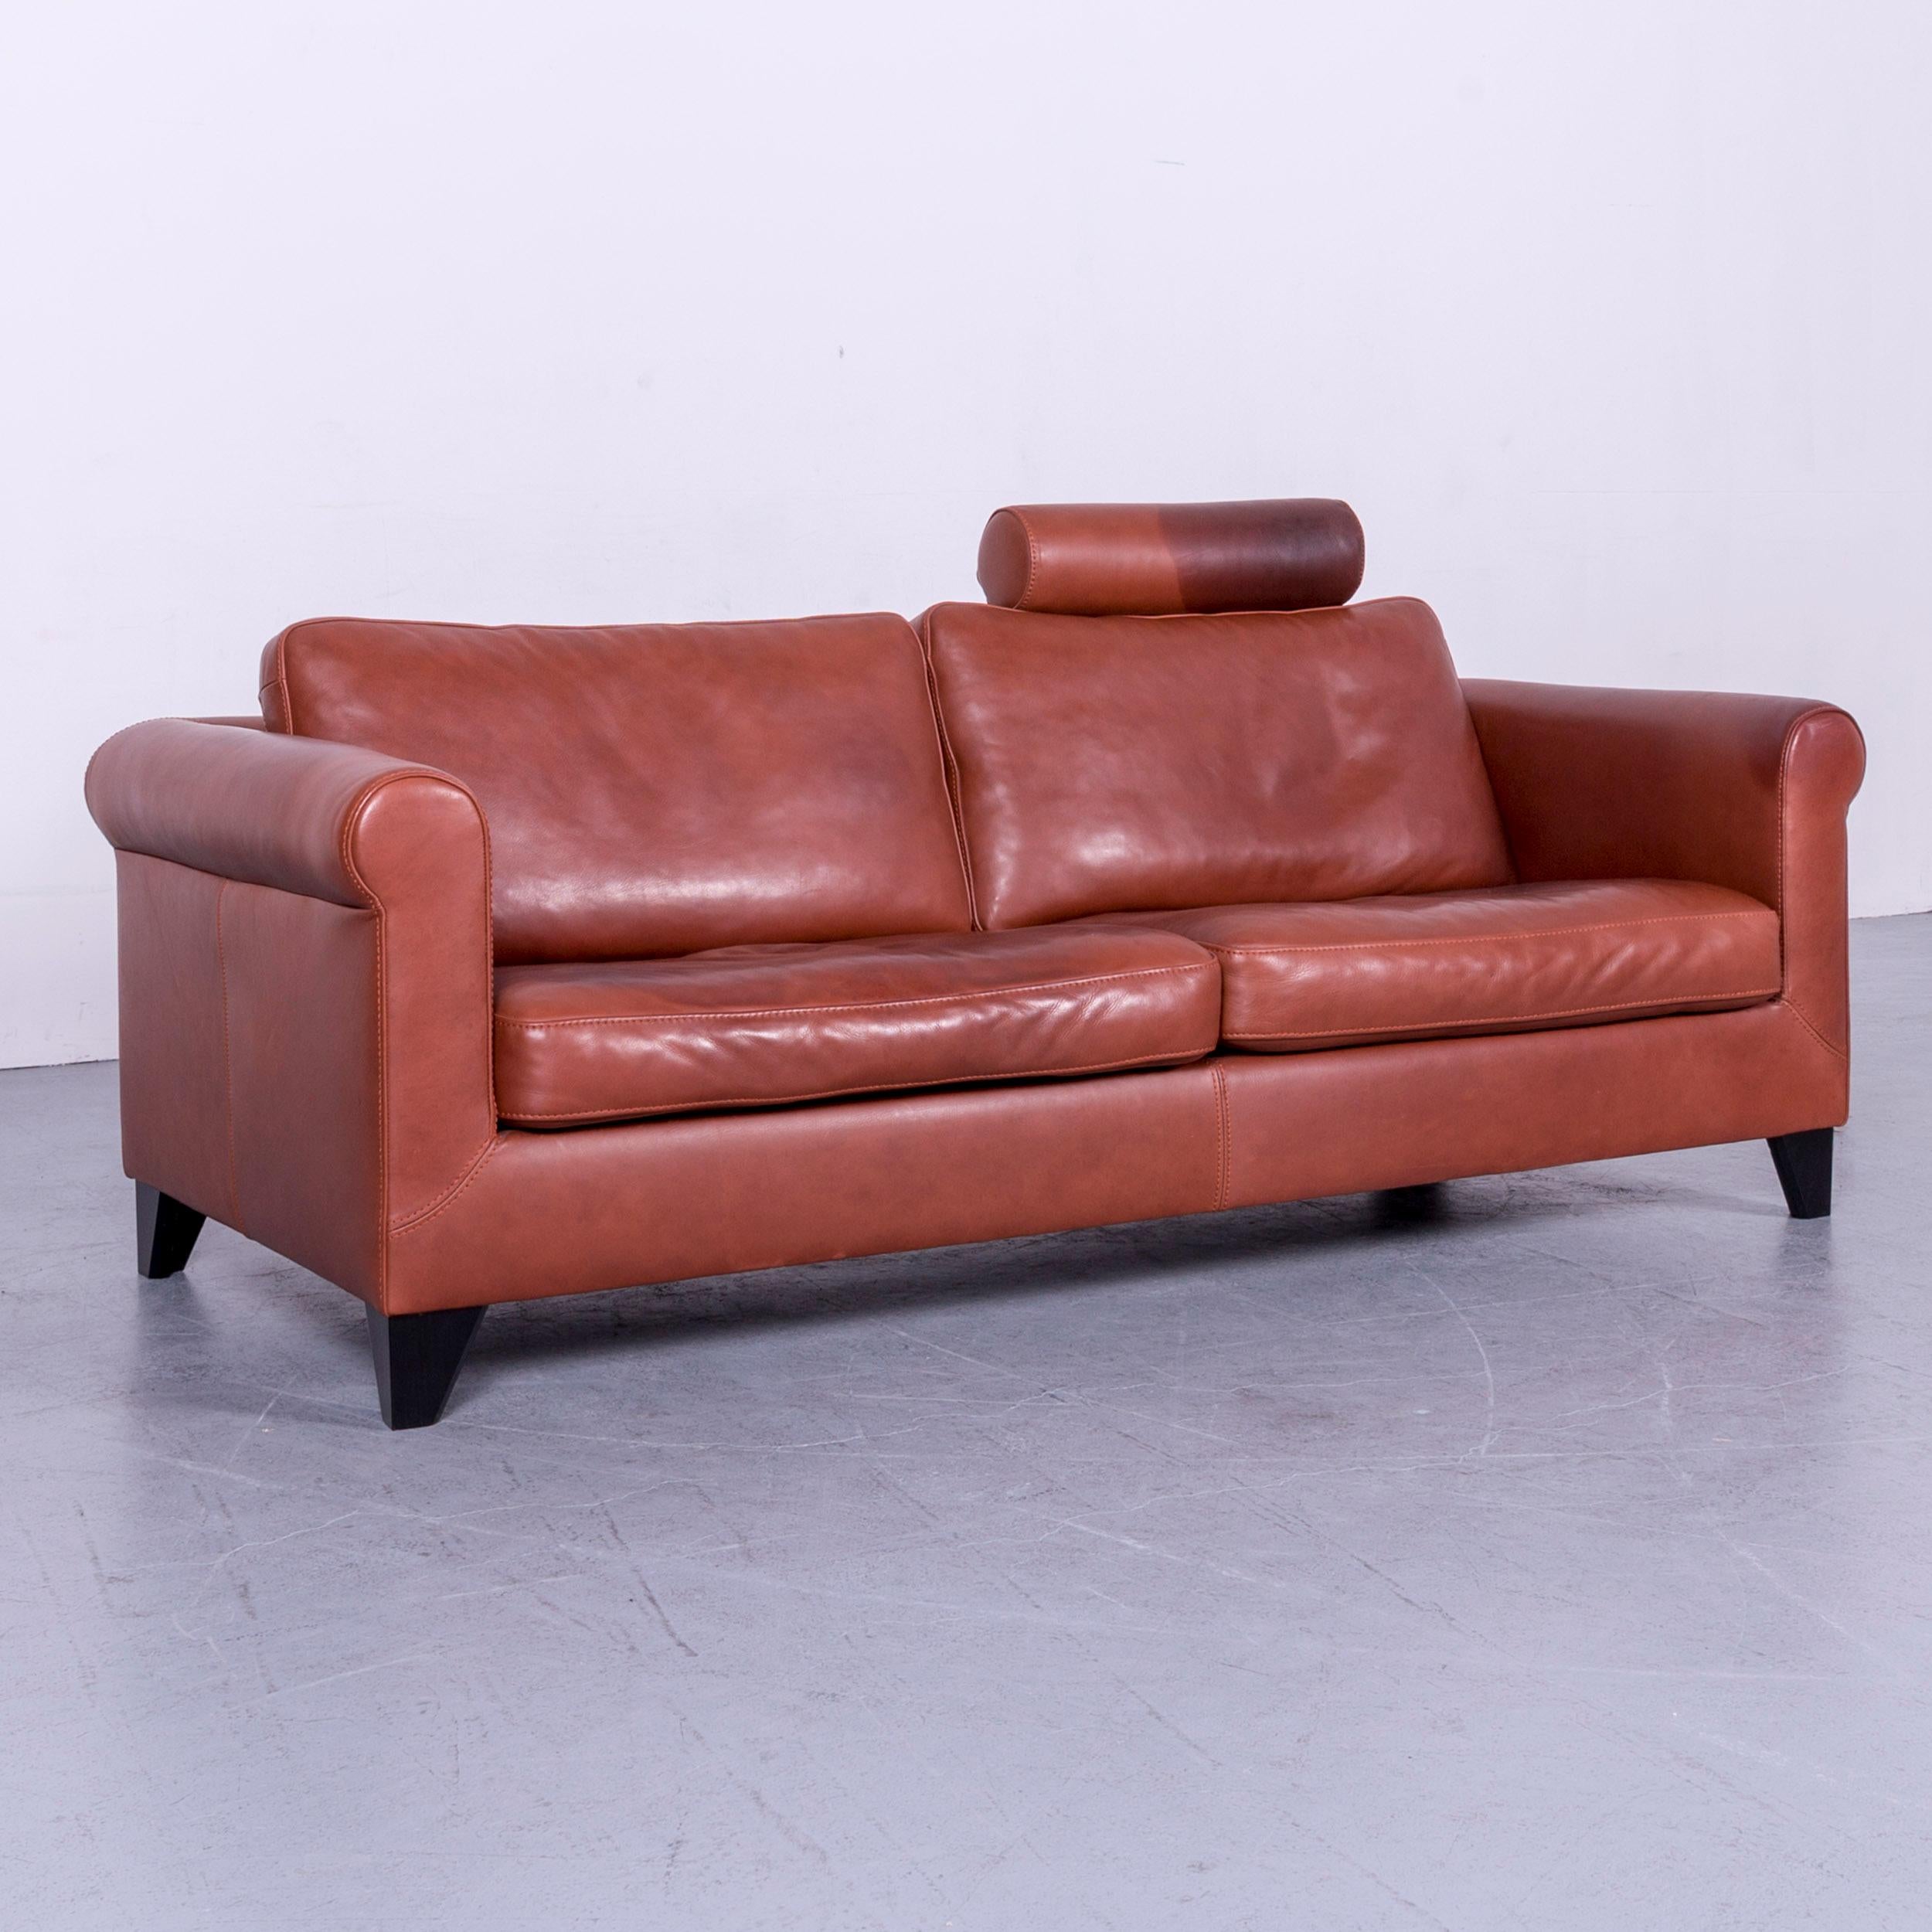 Machalke Designer Leather Sofa Red Two-Seat Couch Set 11